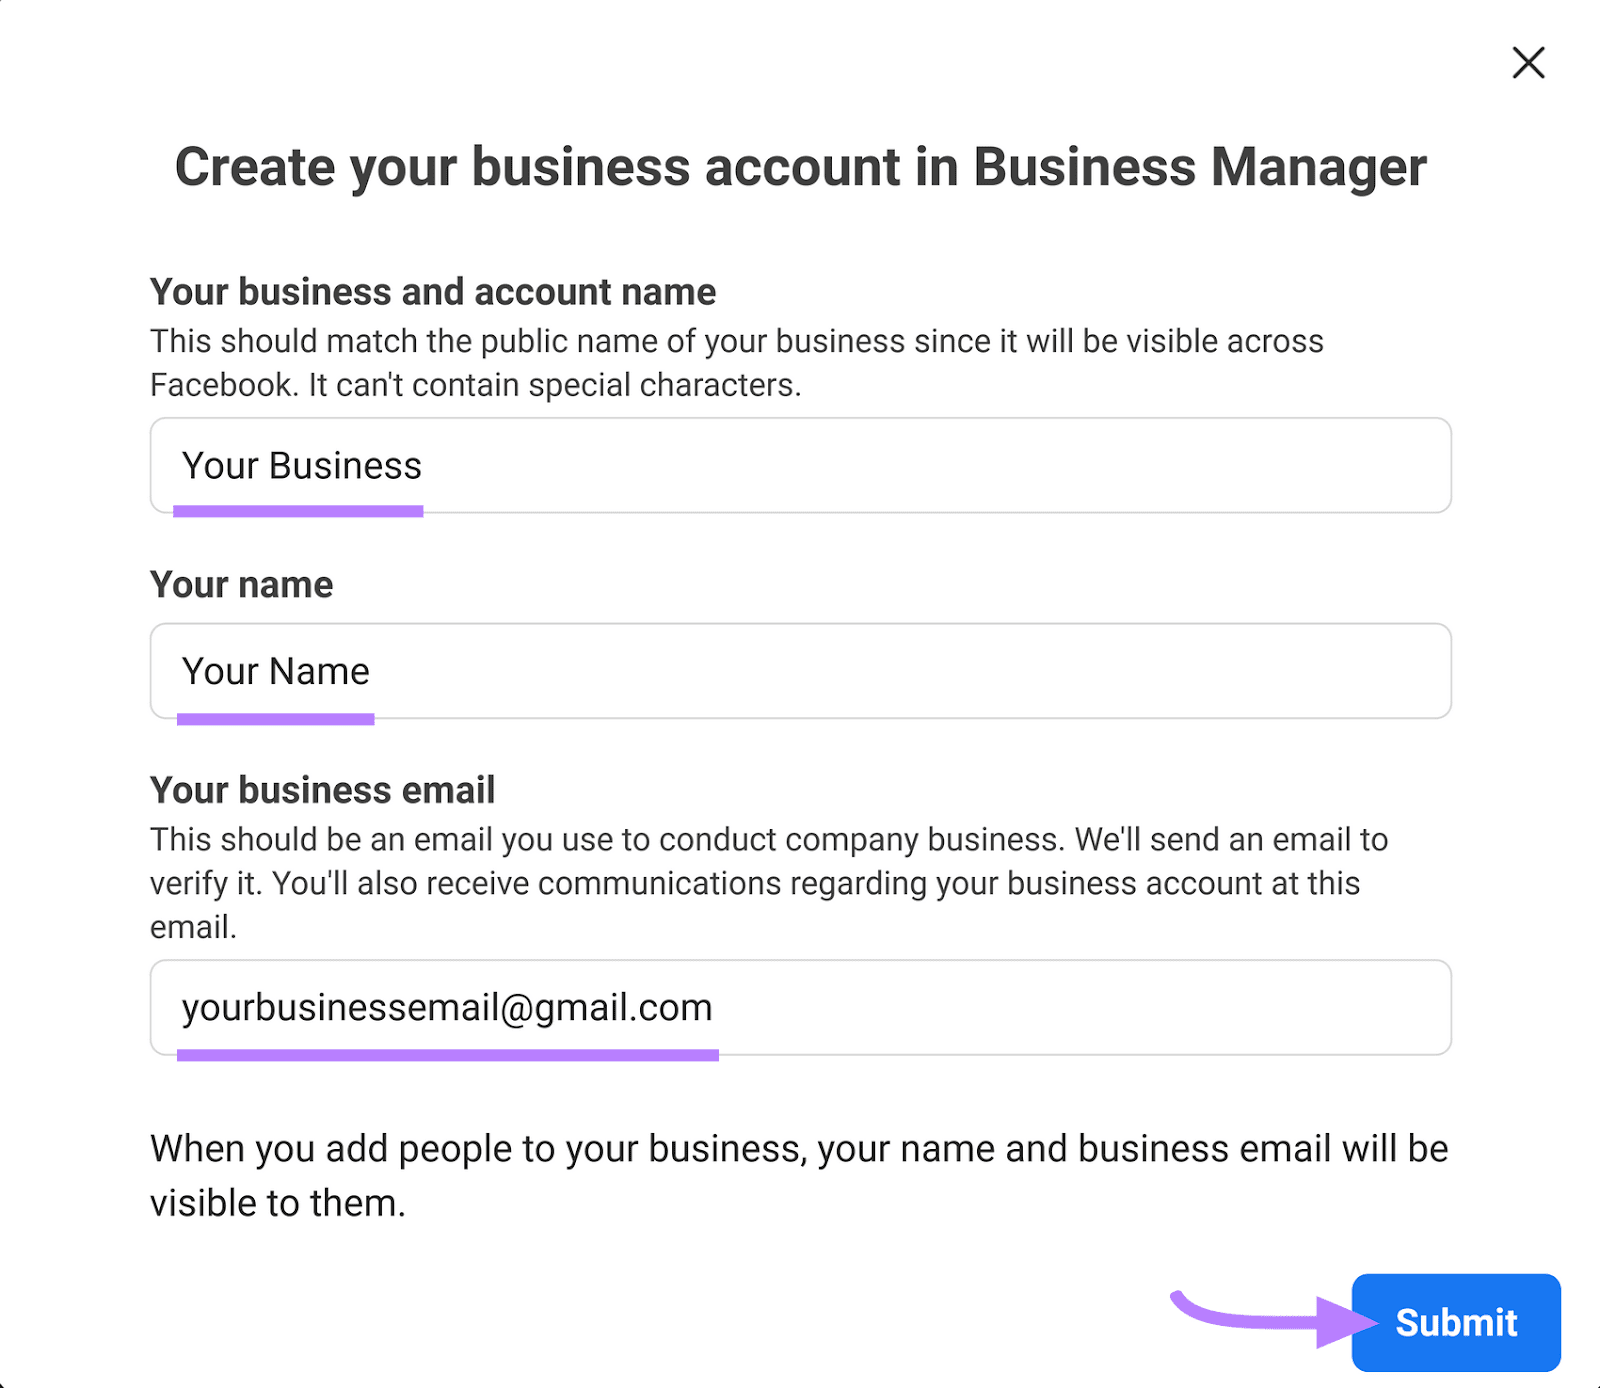 "Create your business account in Business Manager" window